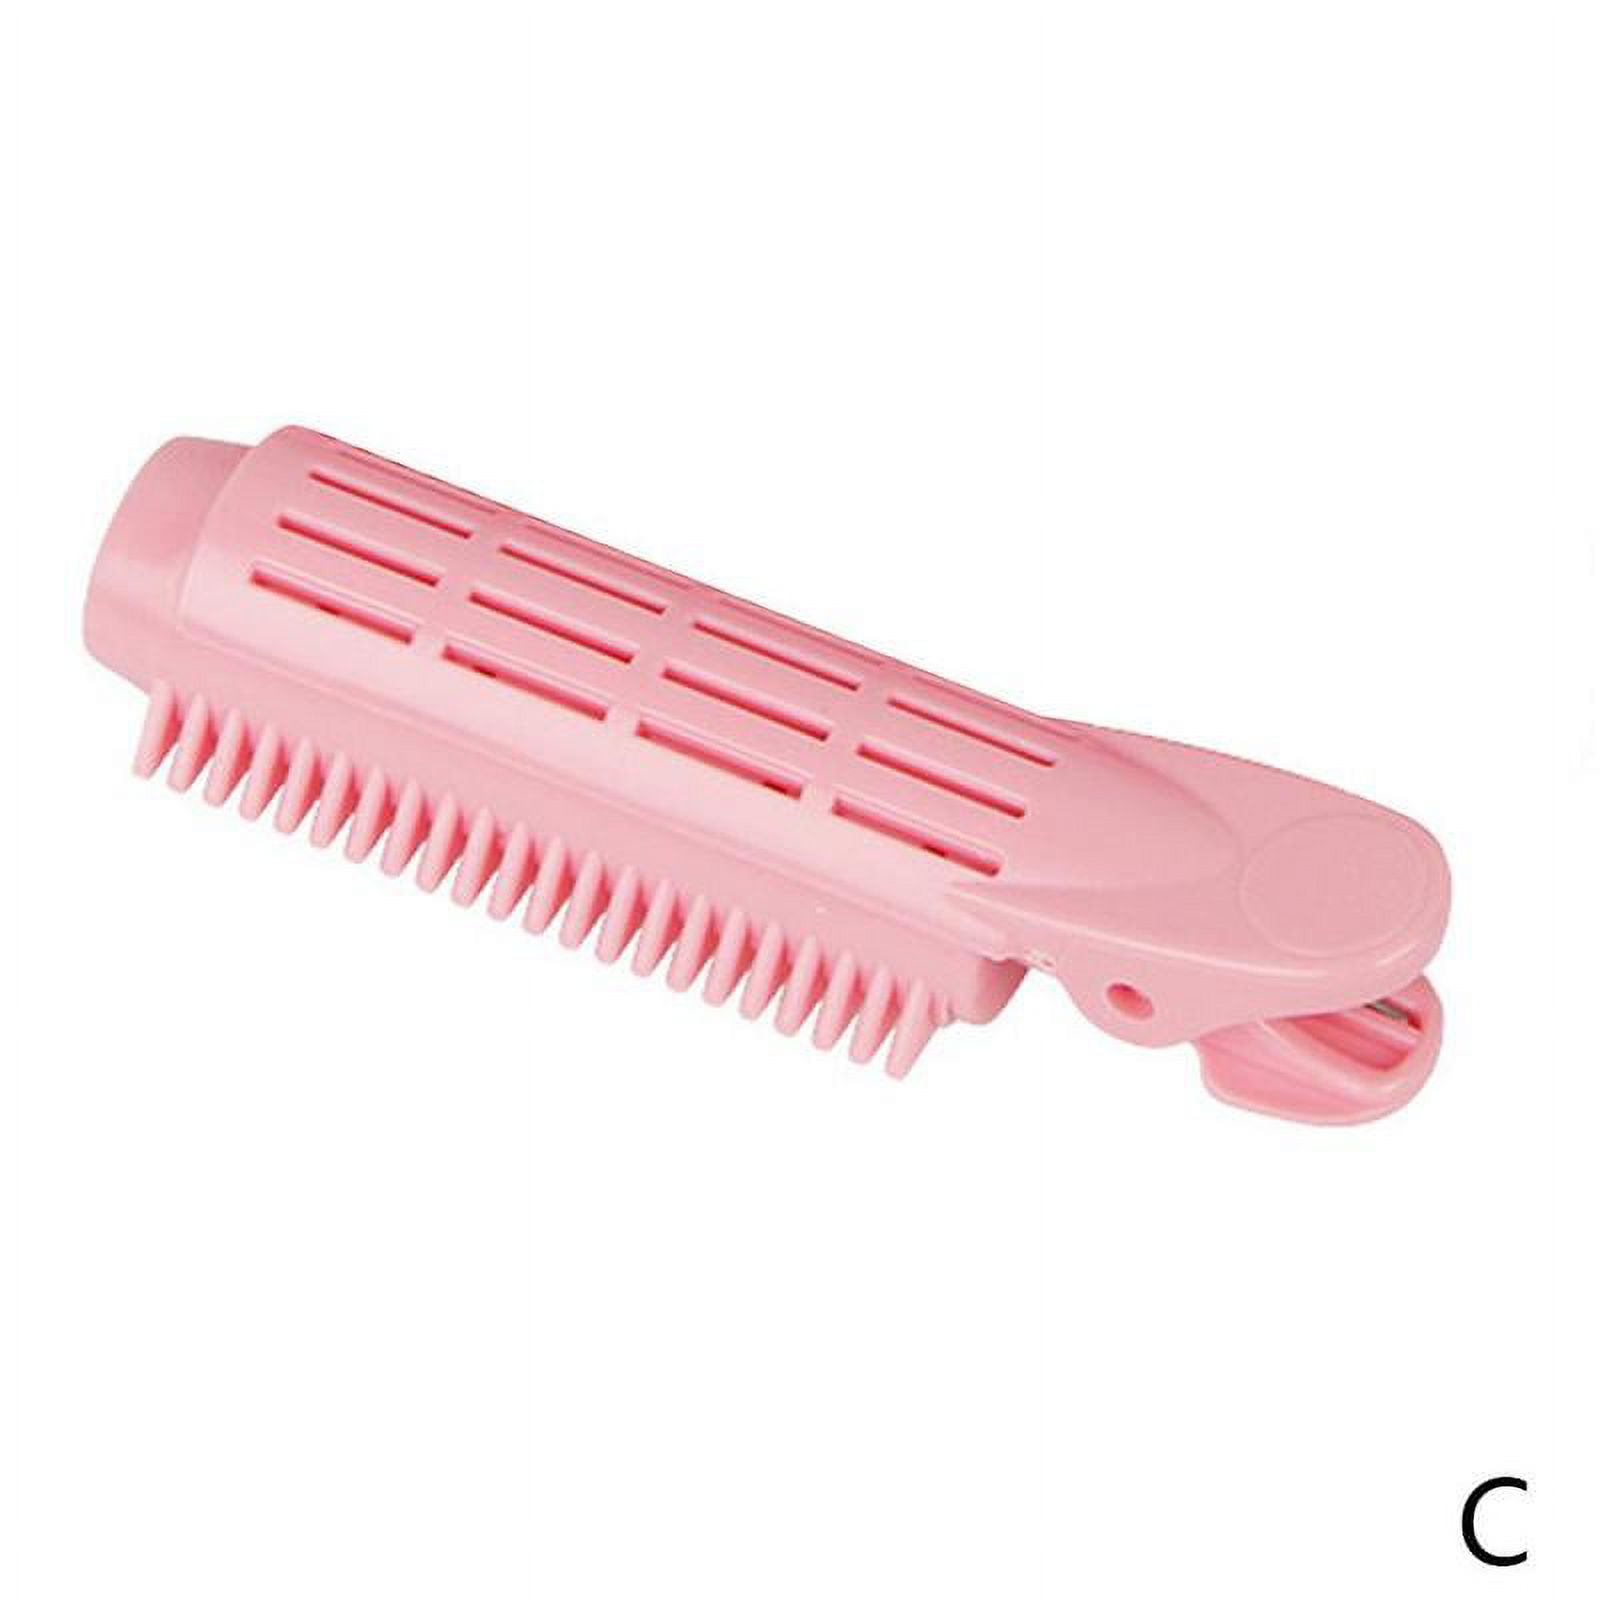 Portable Natural Fluffy Hair Clip Curly Hair Plastic Hair Root Fluffy Clip Bangs Hair Styling Clip Candy Color Hairpins Hair B2C3 - image 1 of 9